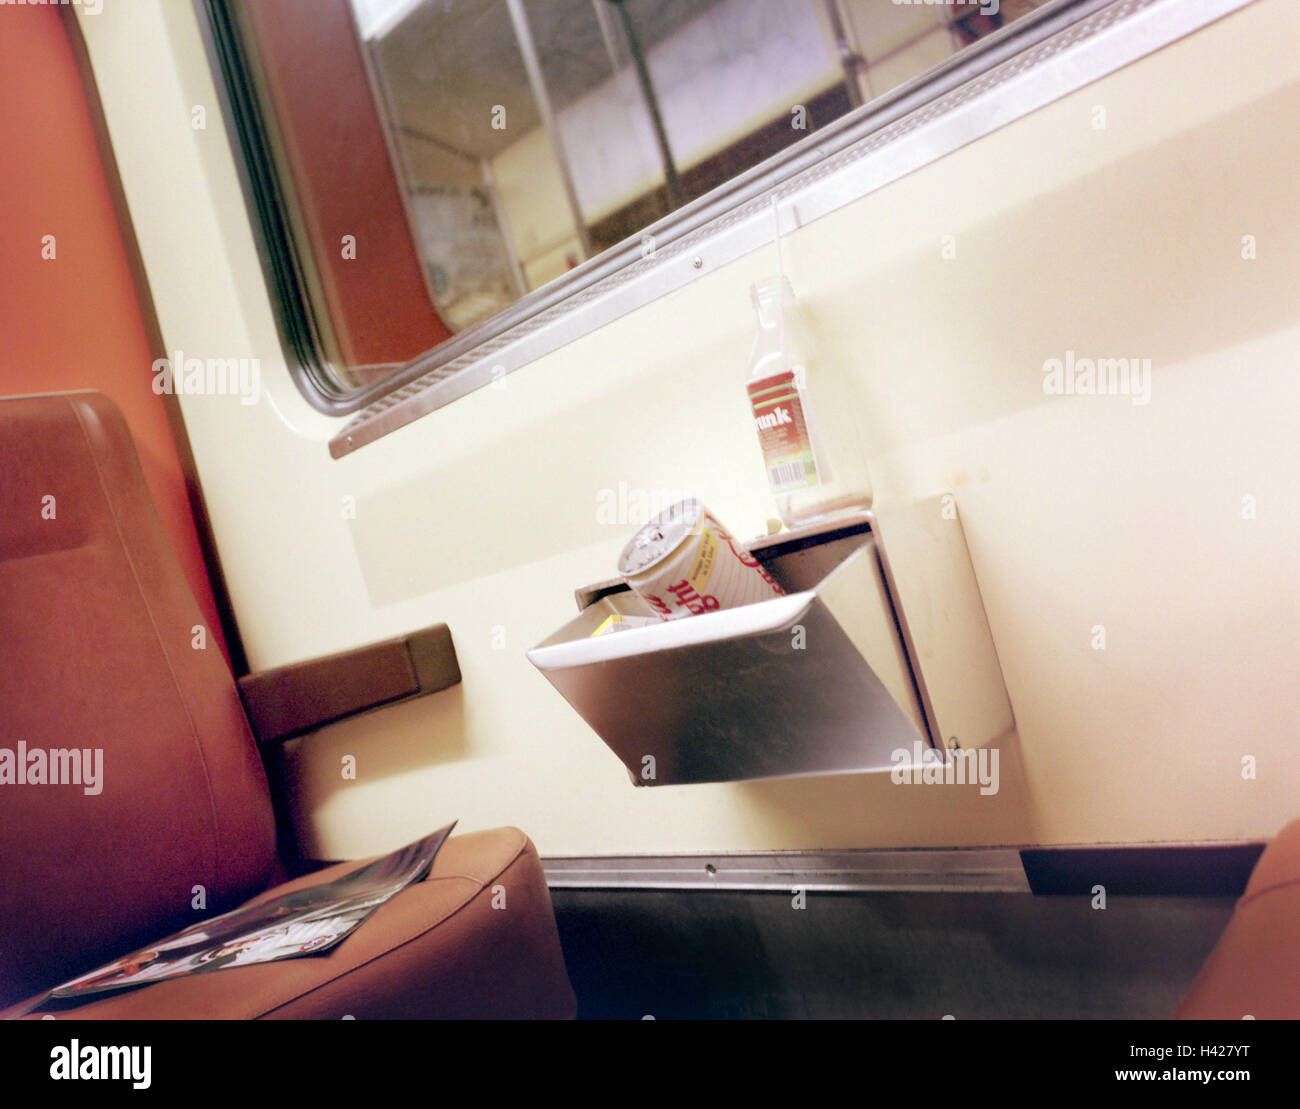 Subway, trashcans, garbage   Means of transportation, publicly, train compartment trash cans, garbage receptacles, frankly, overfills, waste, bottle, empty, beverage can, bench, magazines, left, concept, neglect, descended, indifference, Stock Photo